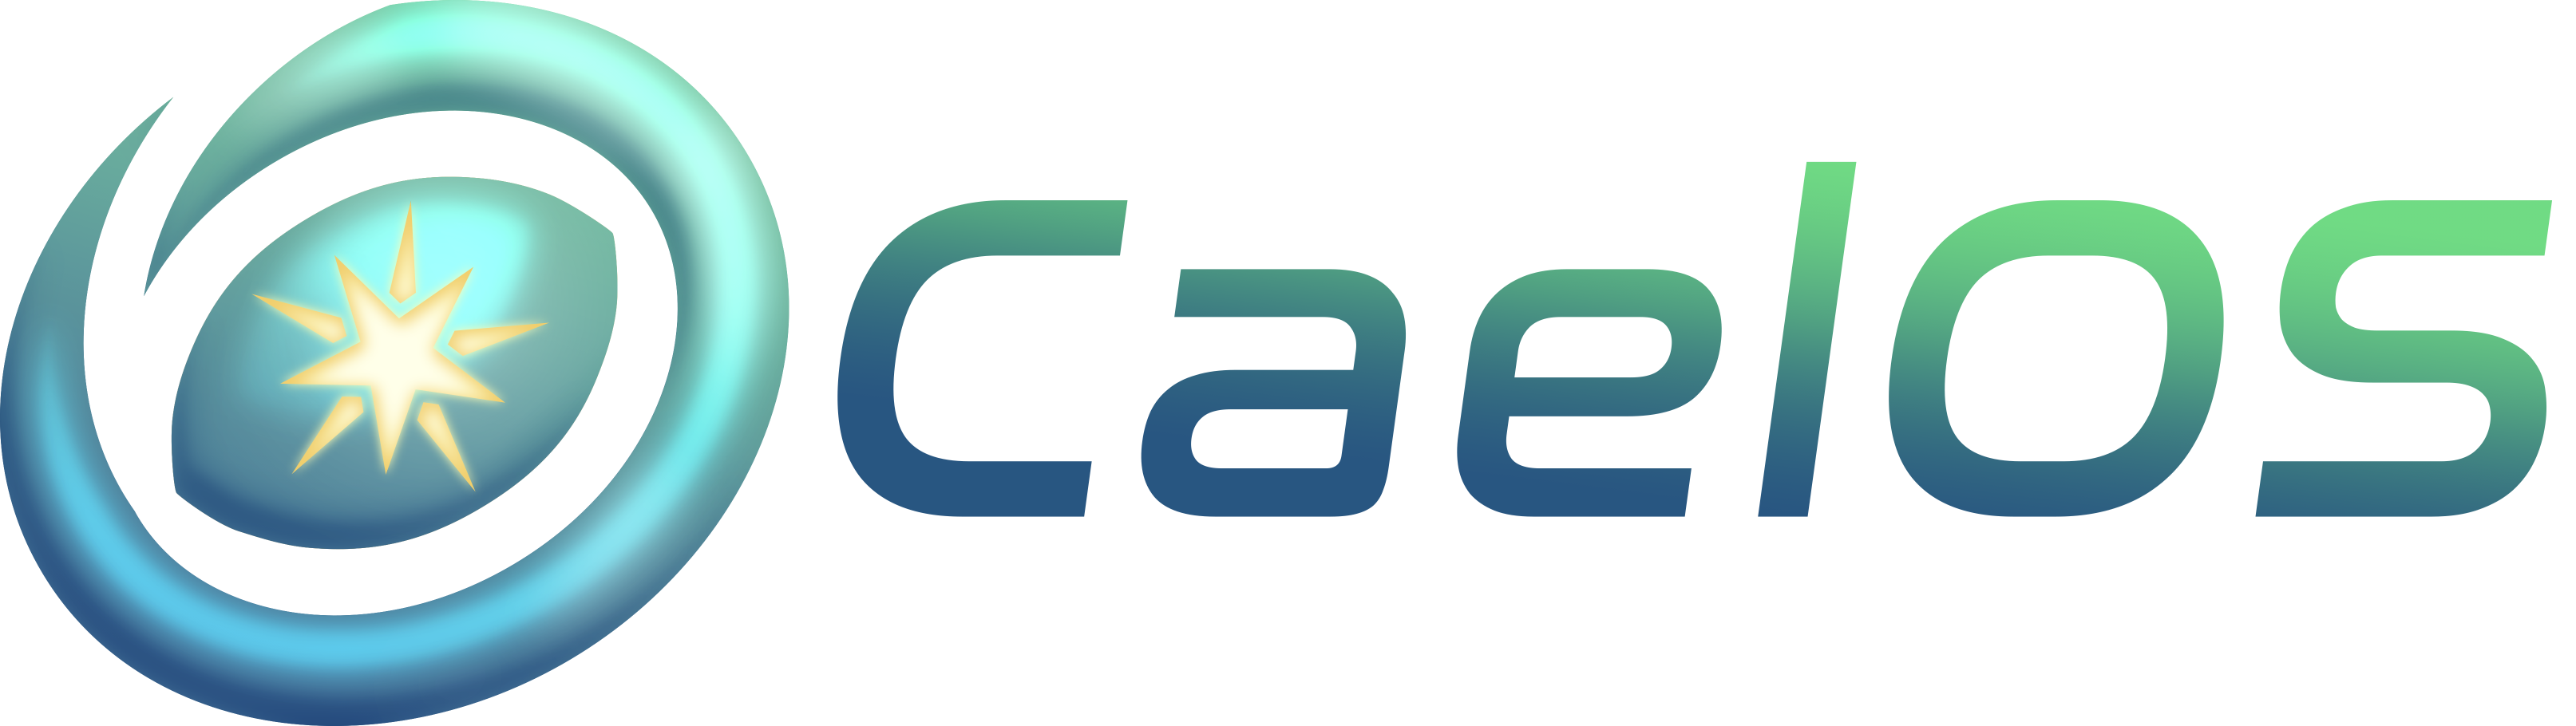 CaelOS logo, an almond shape resembling an eye with a star in the middle, surounded by an ellipsoid stroke